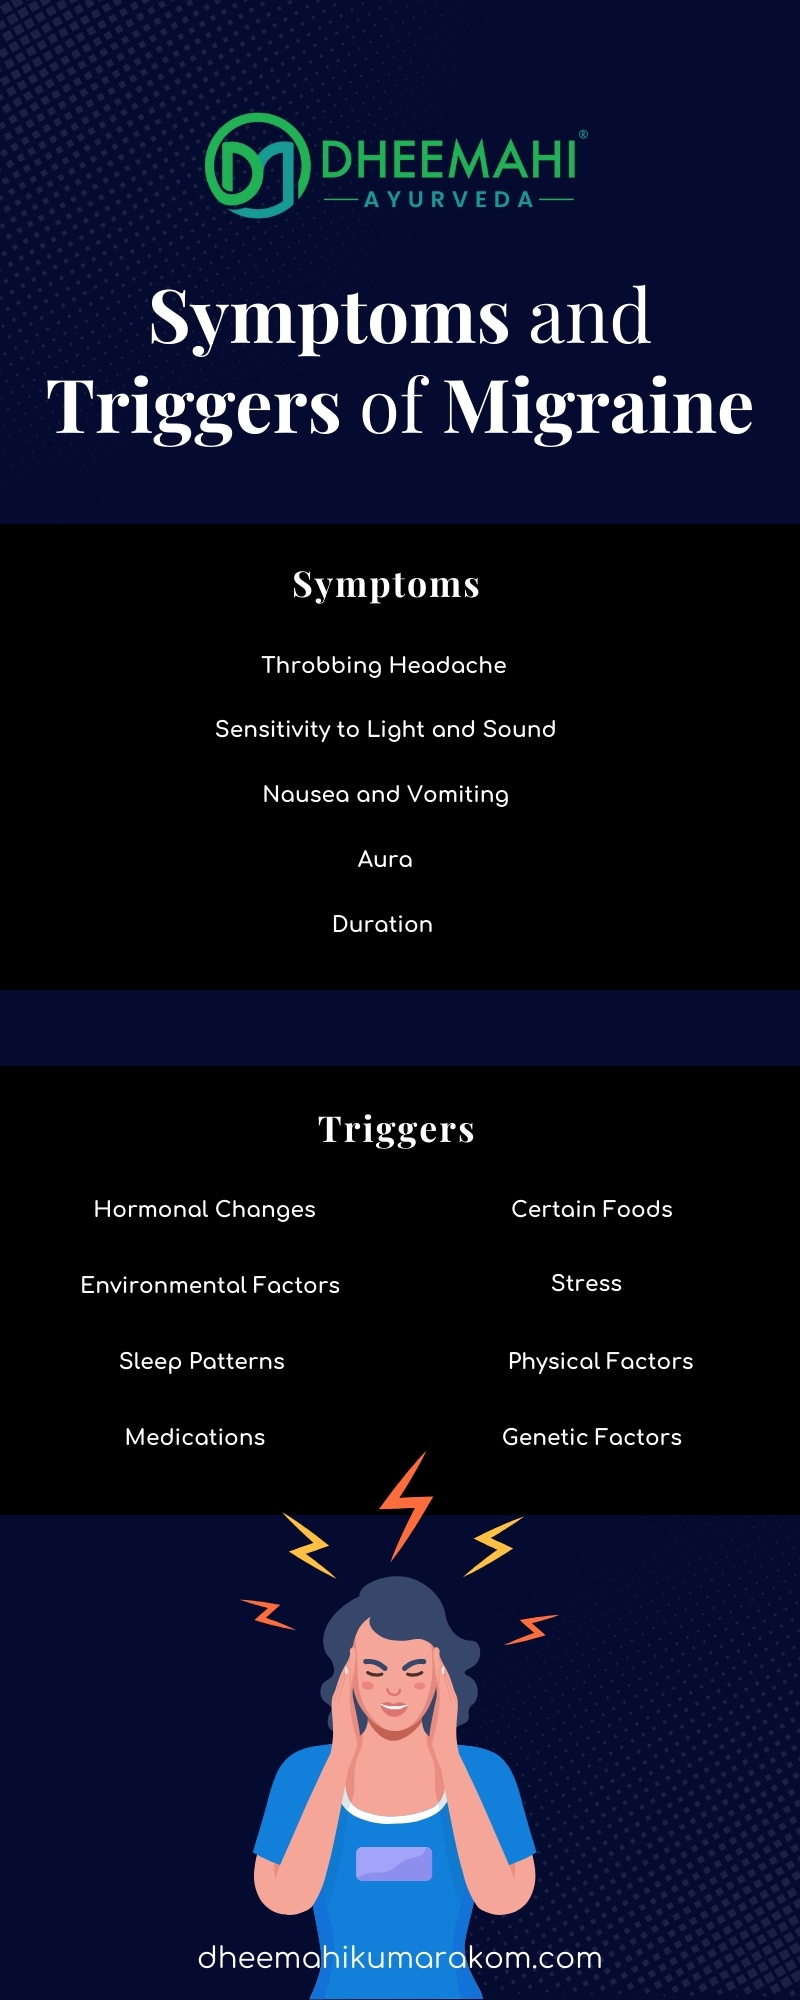 Symptoms and Triggers of Migraine